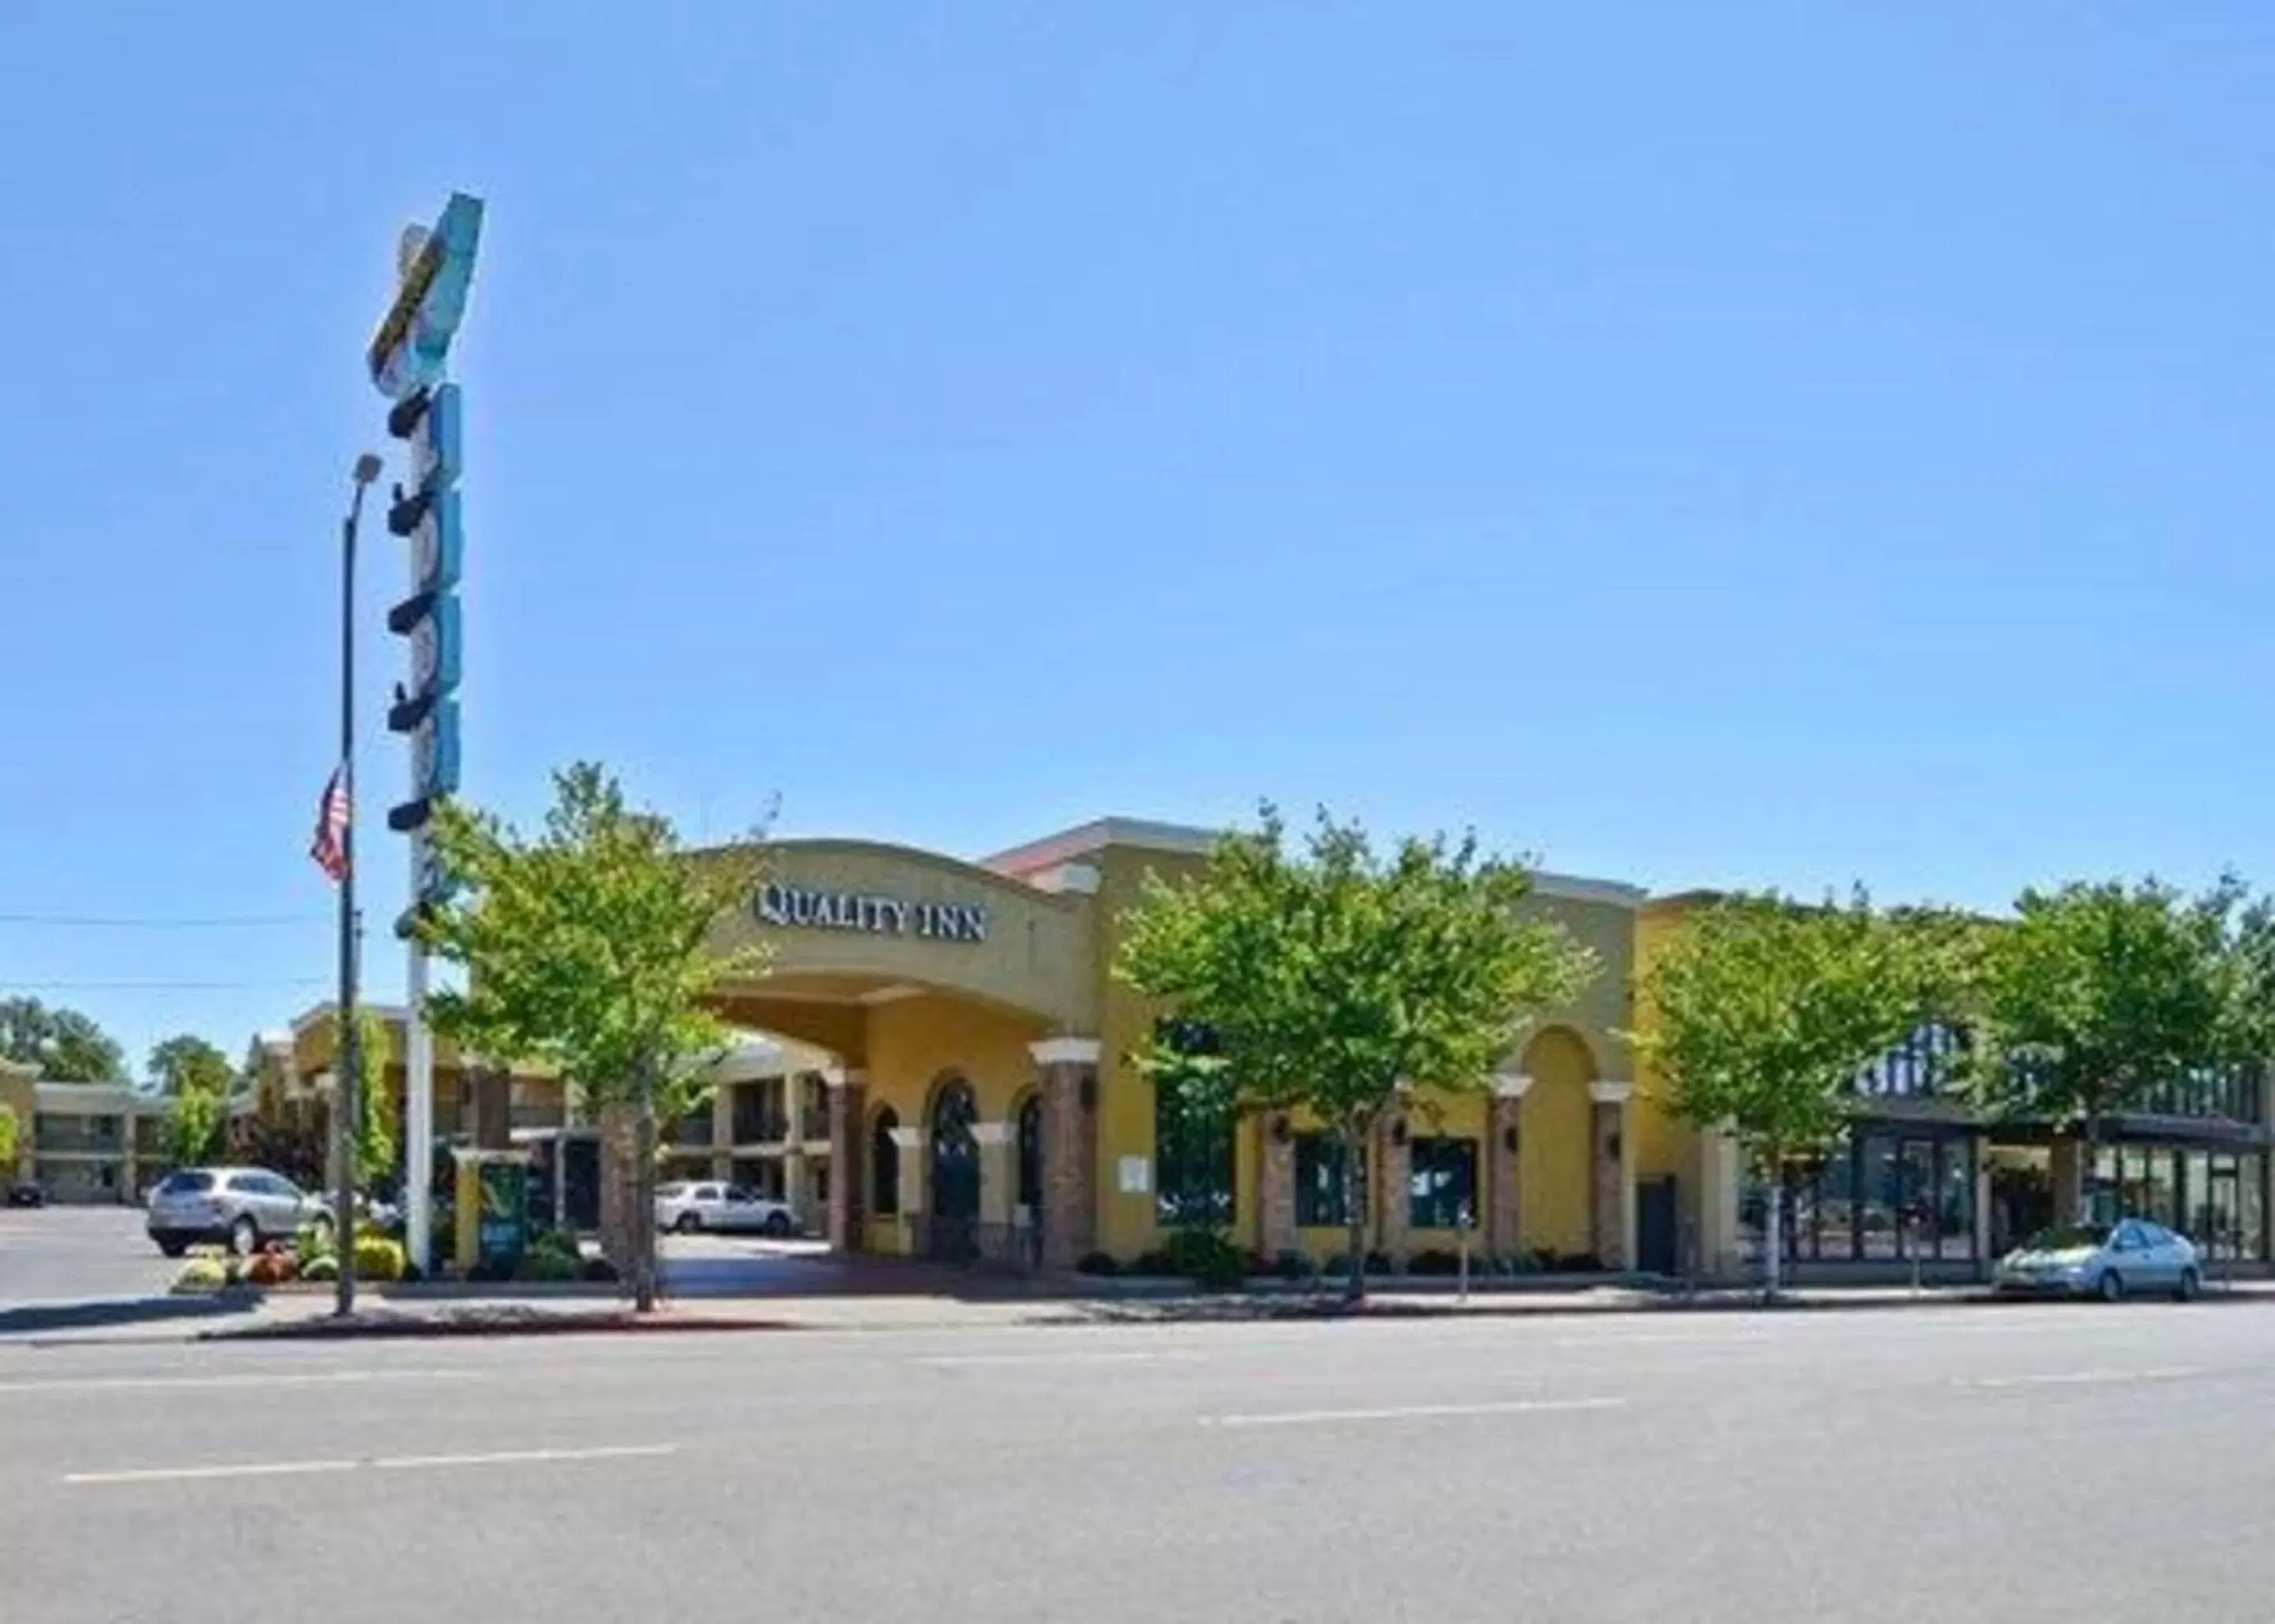 Property building in Quality Inn Chico